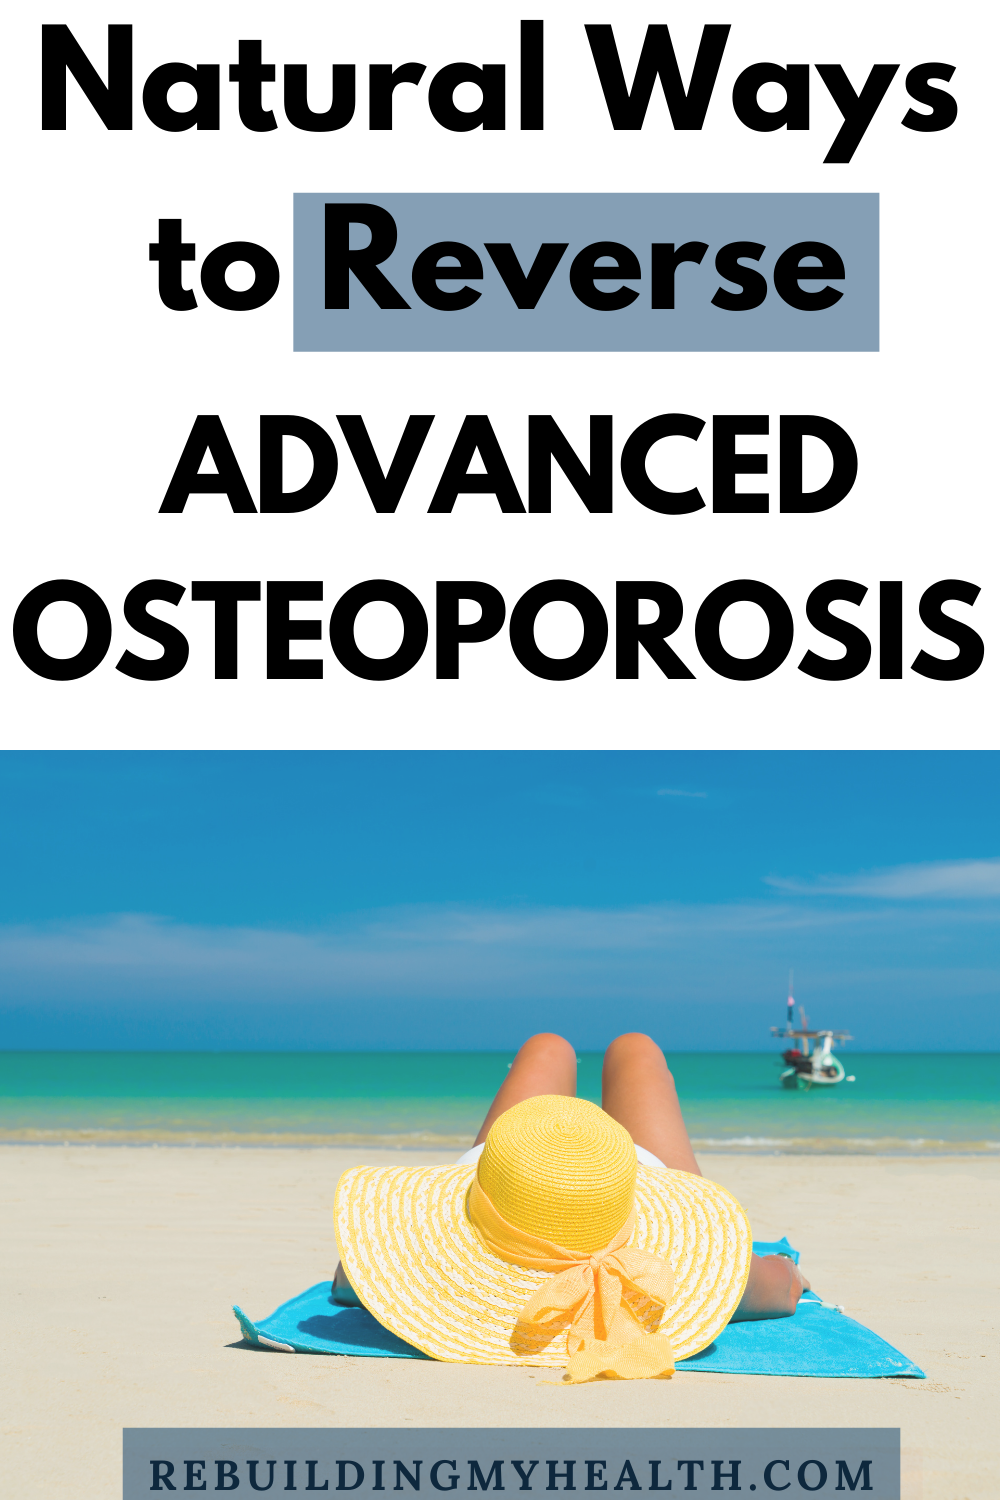 After learning she had the bone density of an 80-year-old - at 30 - Mira found ways to reverse advanced osteoporosis naturally.